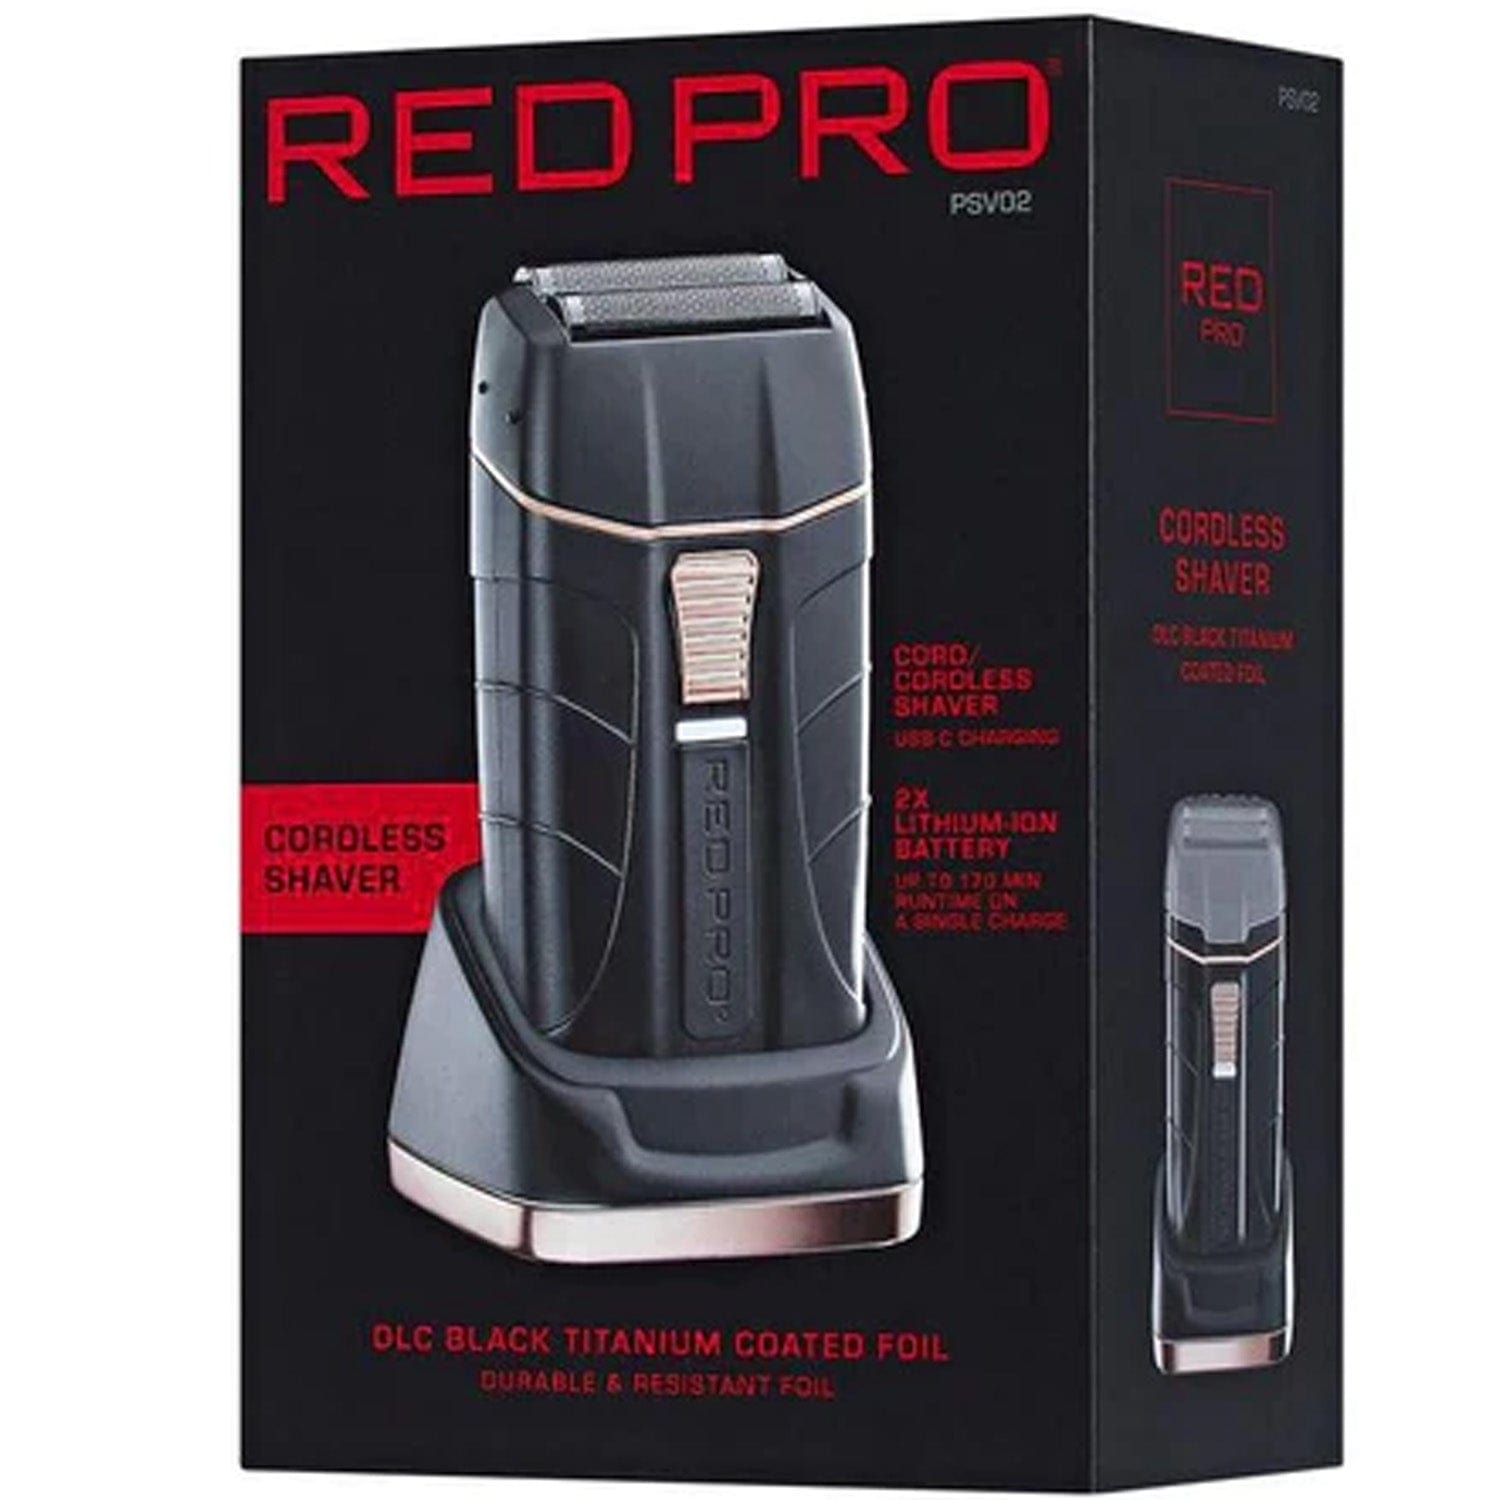 RED PRO CORDLESS SHAVER W/CHARGING STATION PSV02